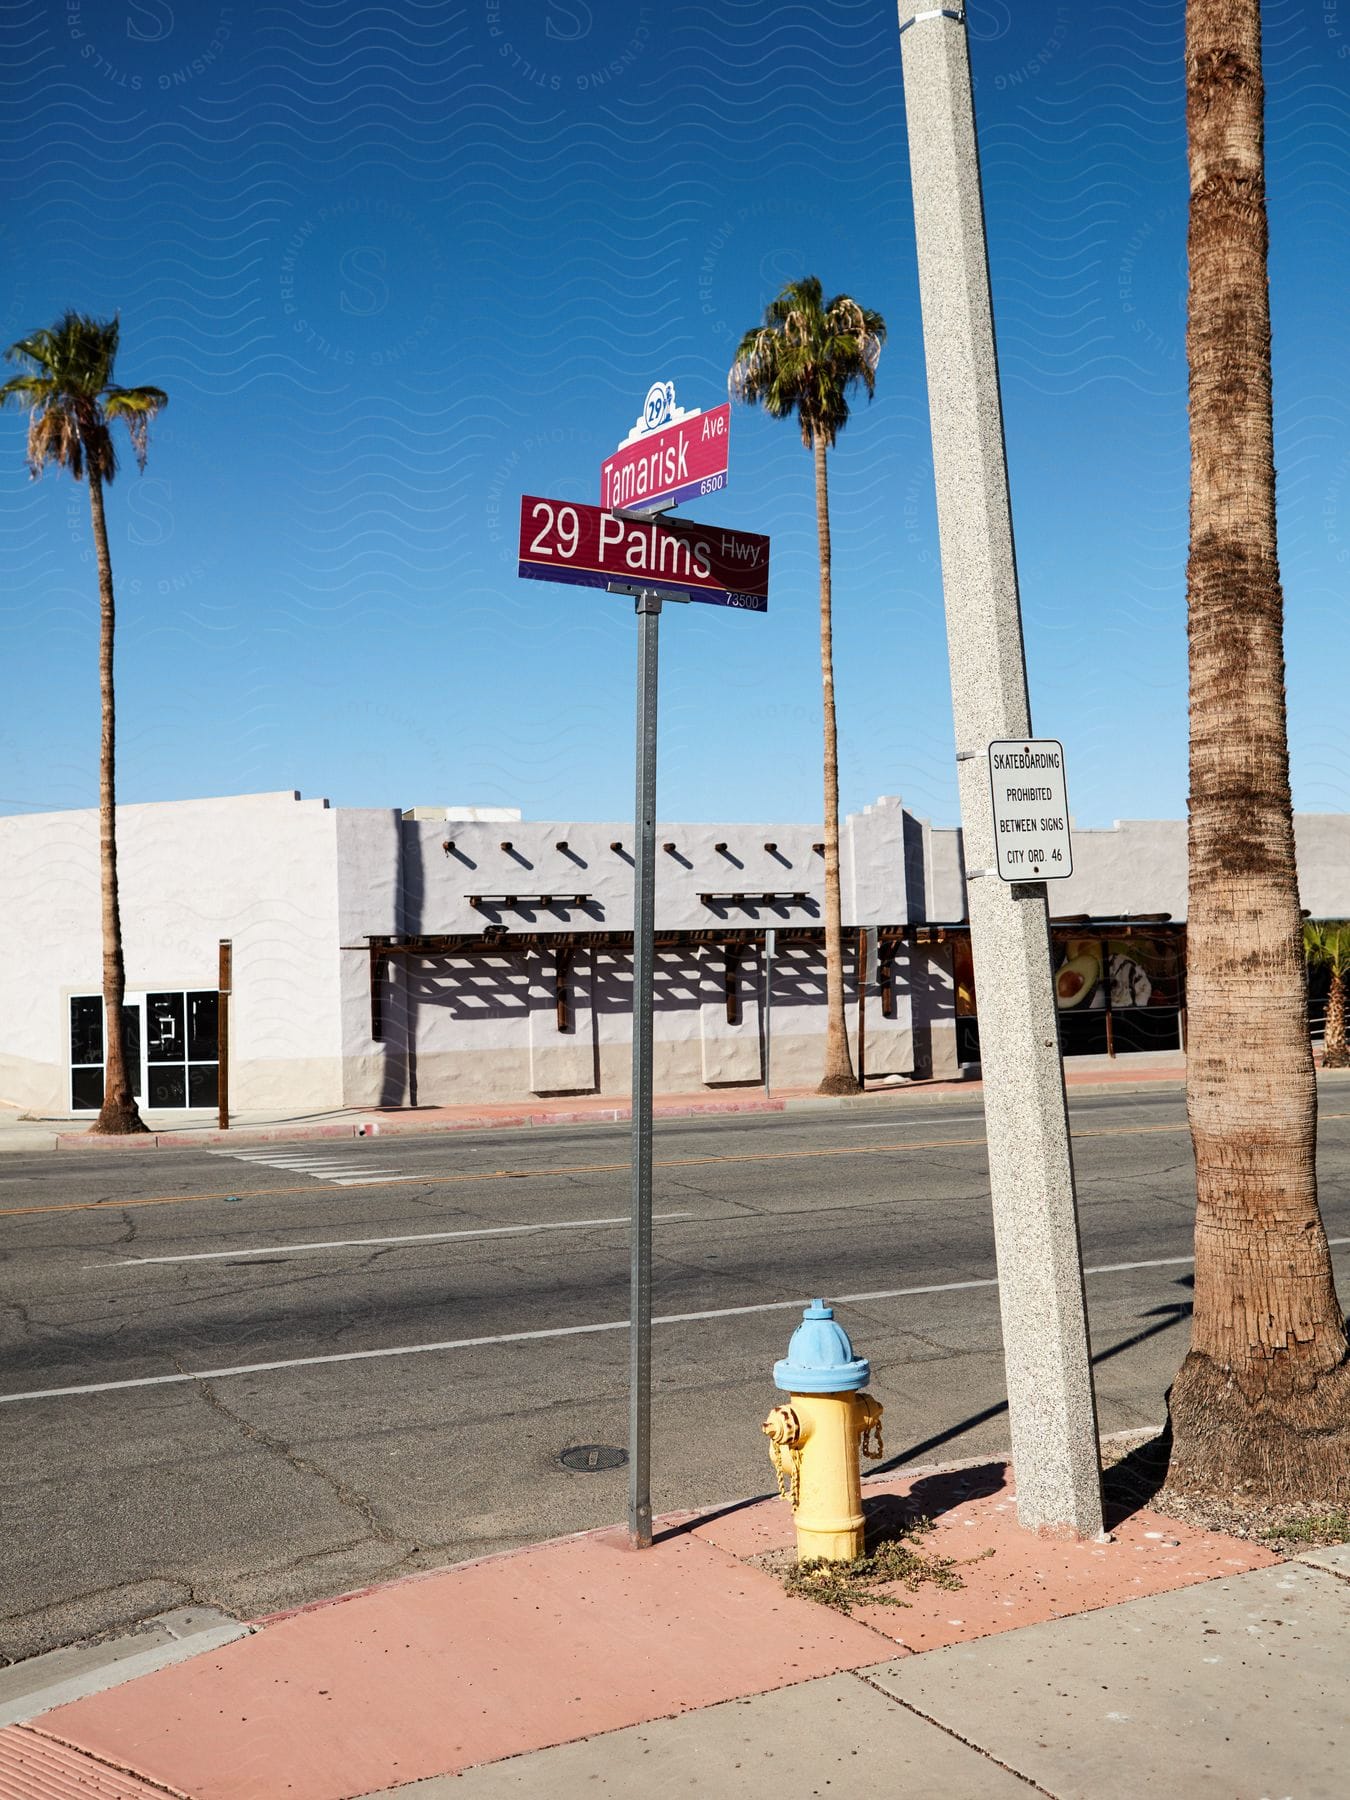 Street corner with '29 Palms Hwy' sign, palm trees, and fire hydrant on a sunny day.